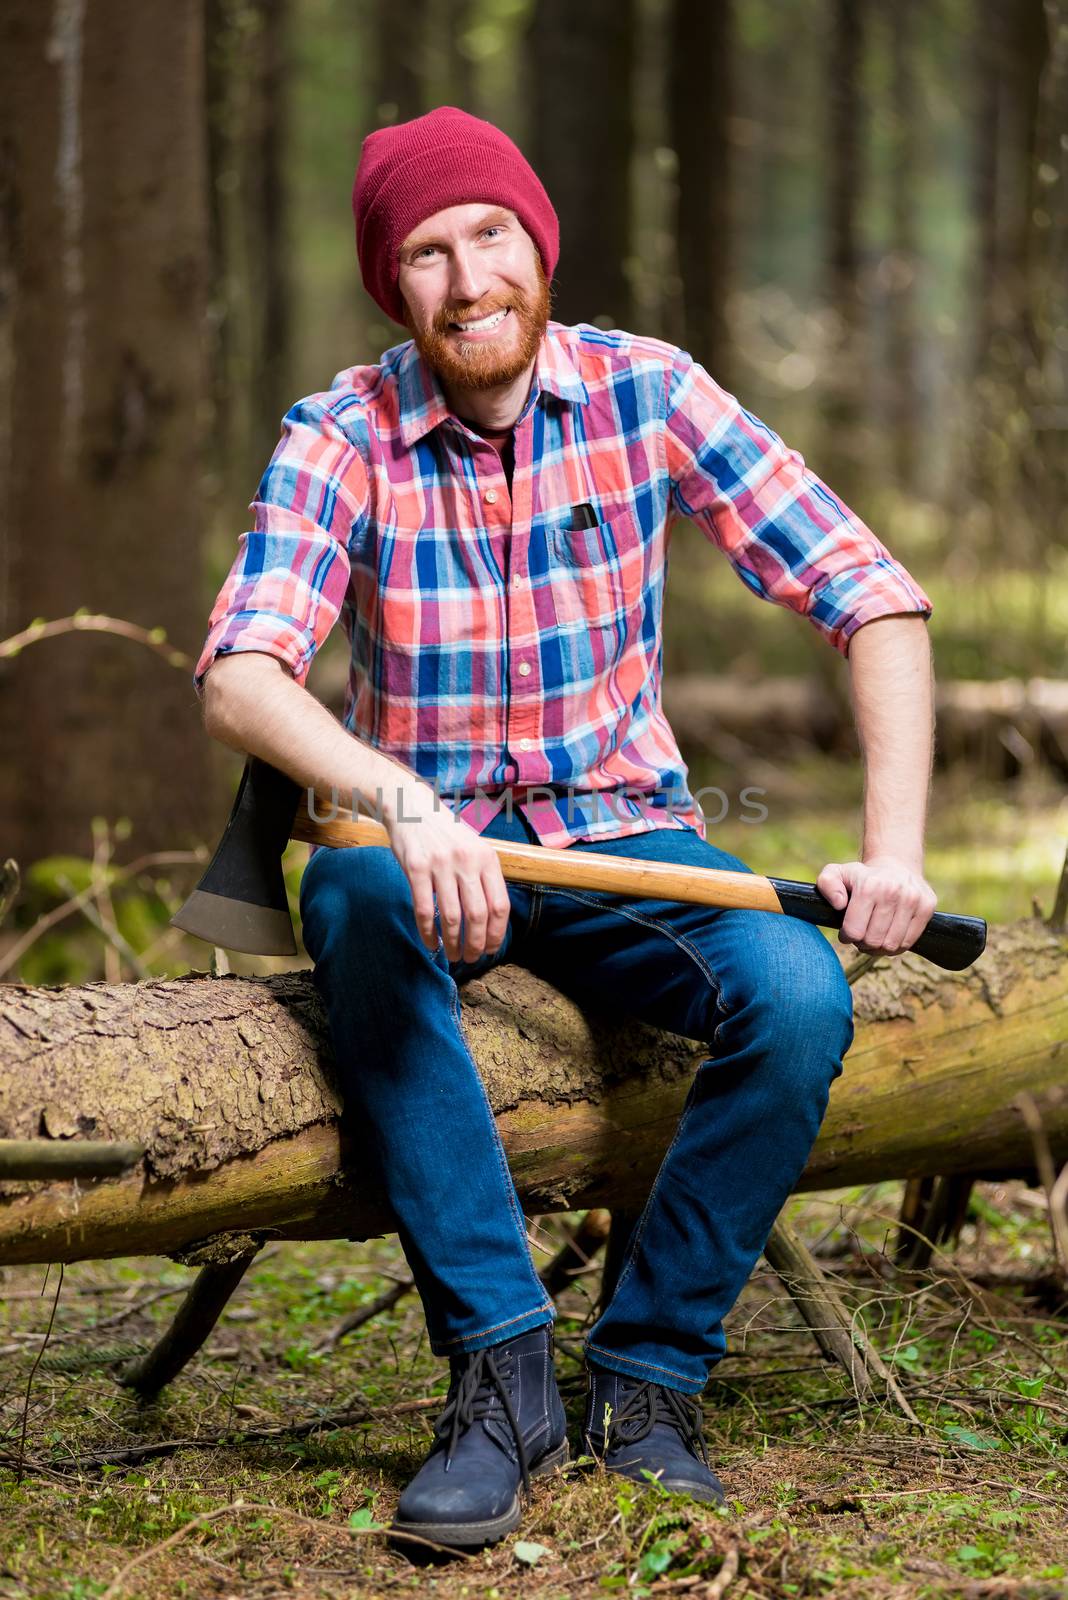 a smiling bearded lumberjack in a hat and shirt with an ax sits by kosmsos111